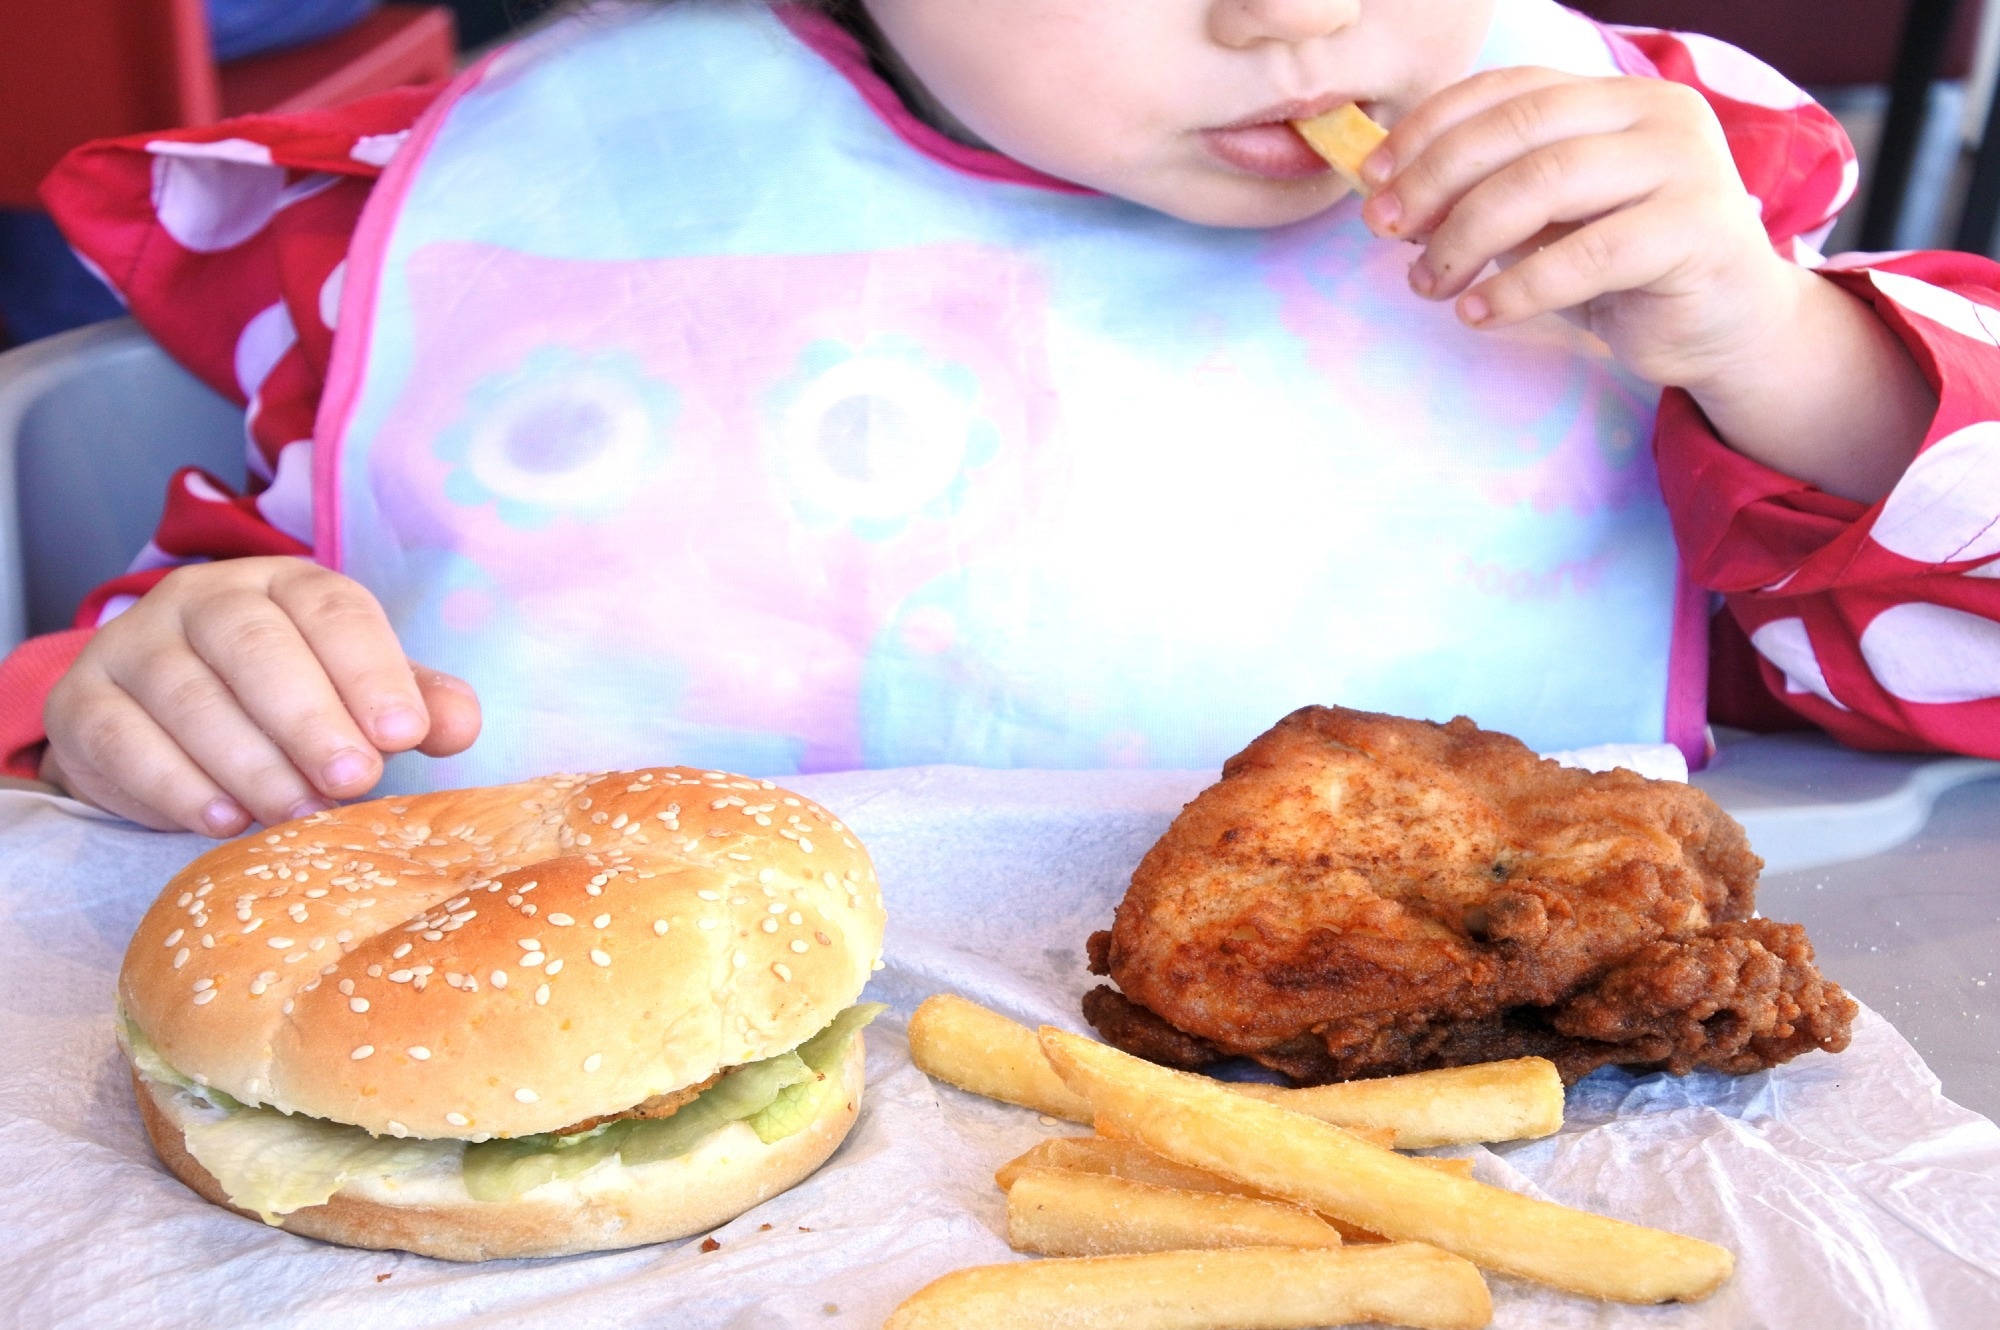 Childhood and adolescent obesity: time to act